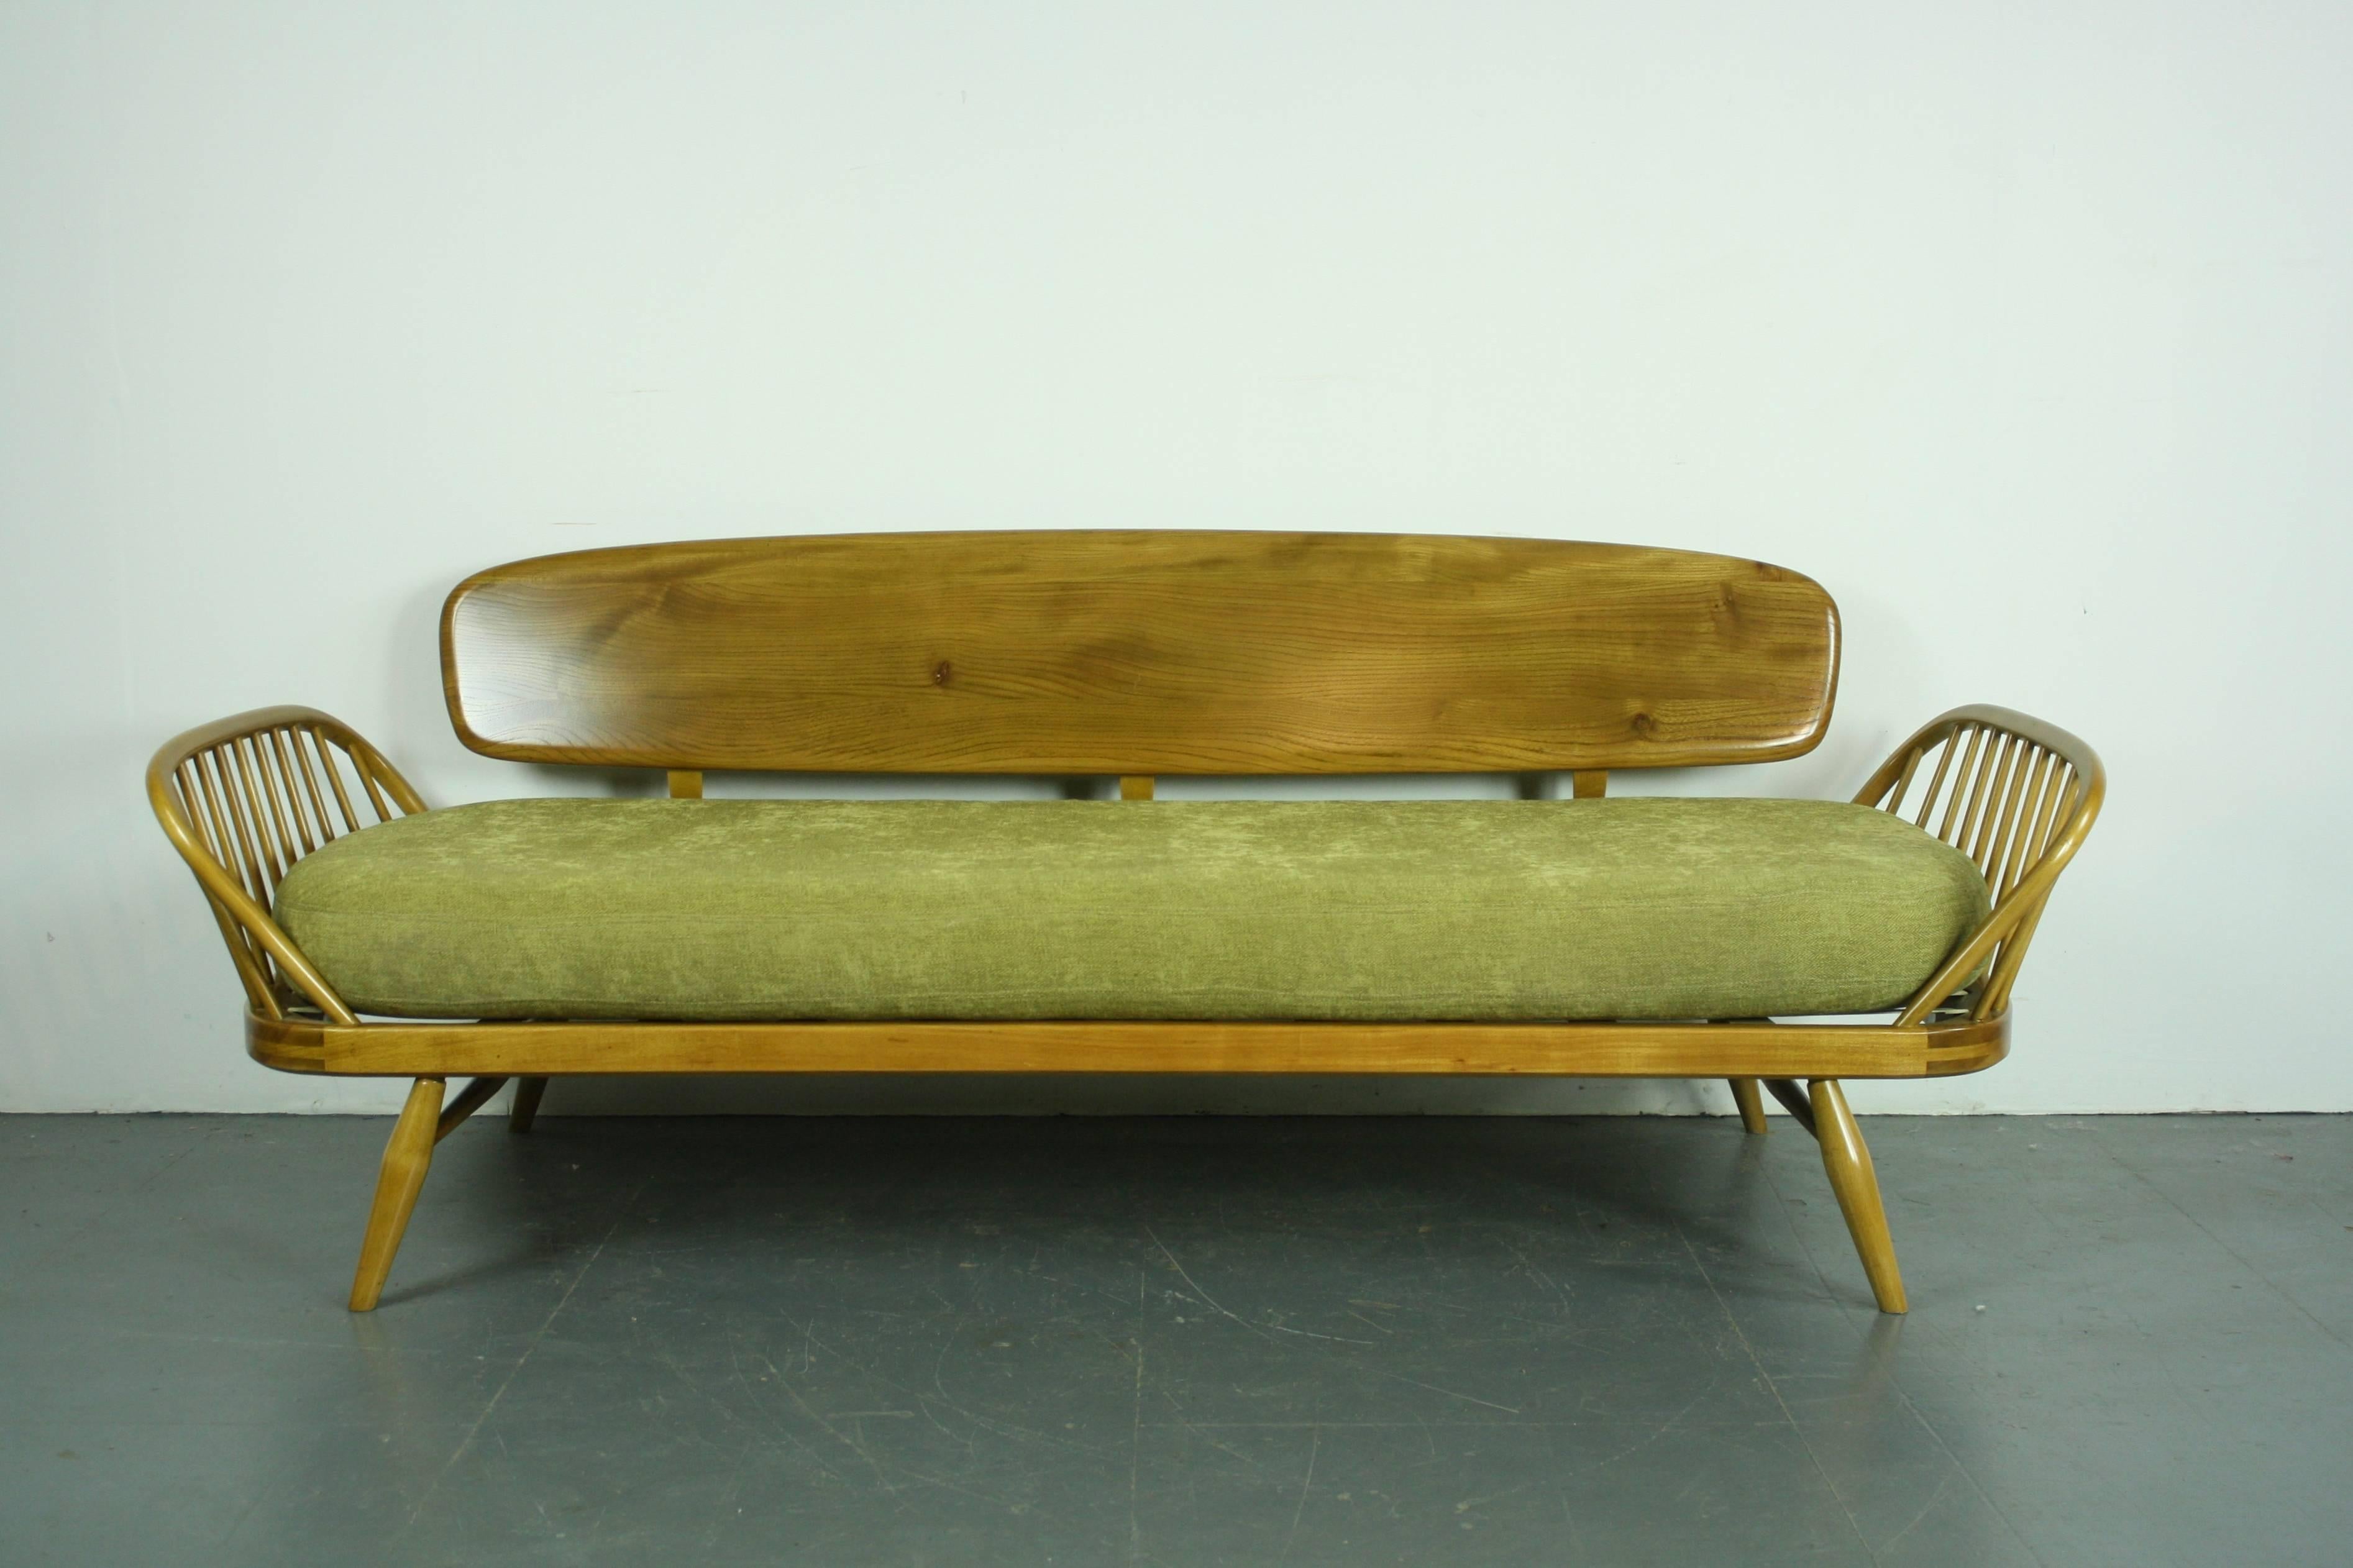 English Vintage Ercol 355 Studio Couch Sofa Bed in Beech with Green Upholstery